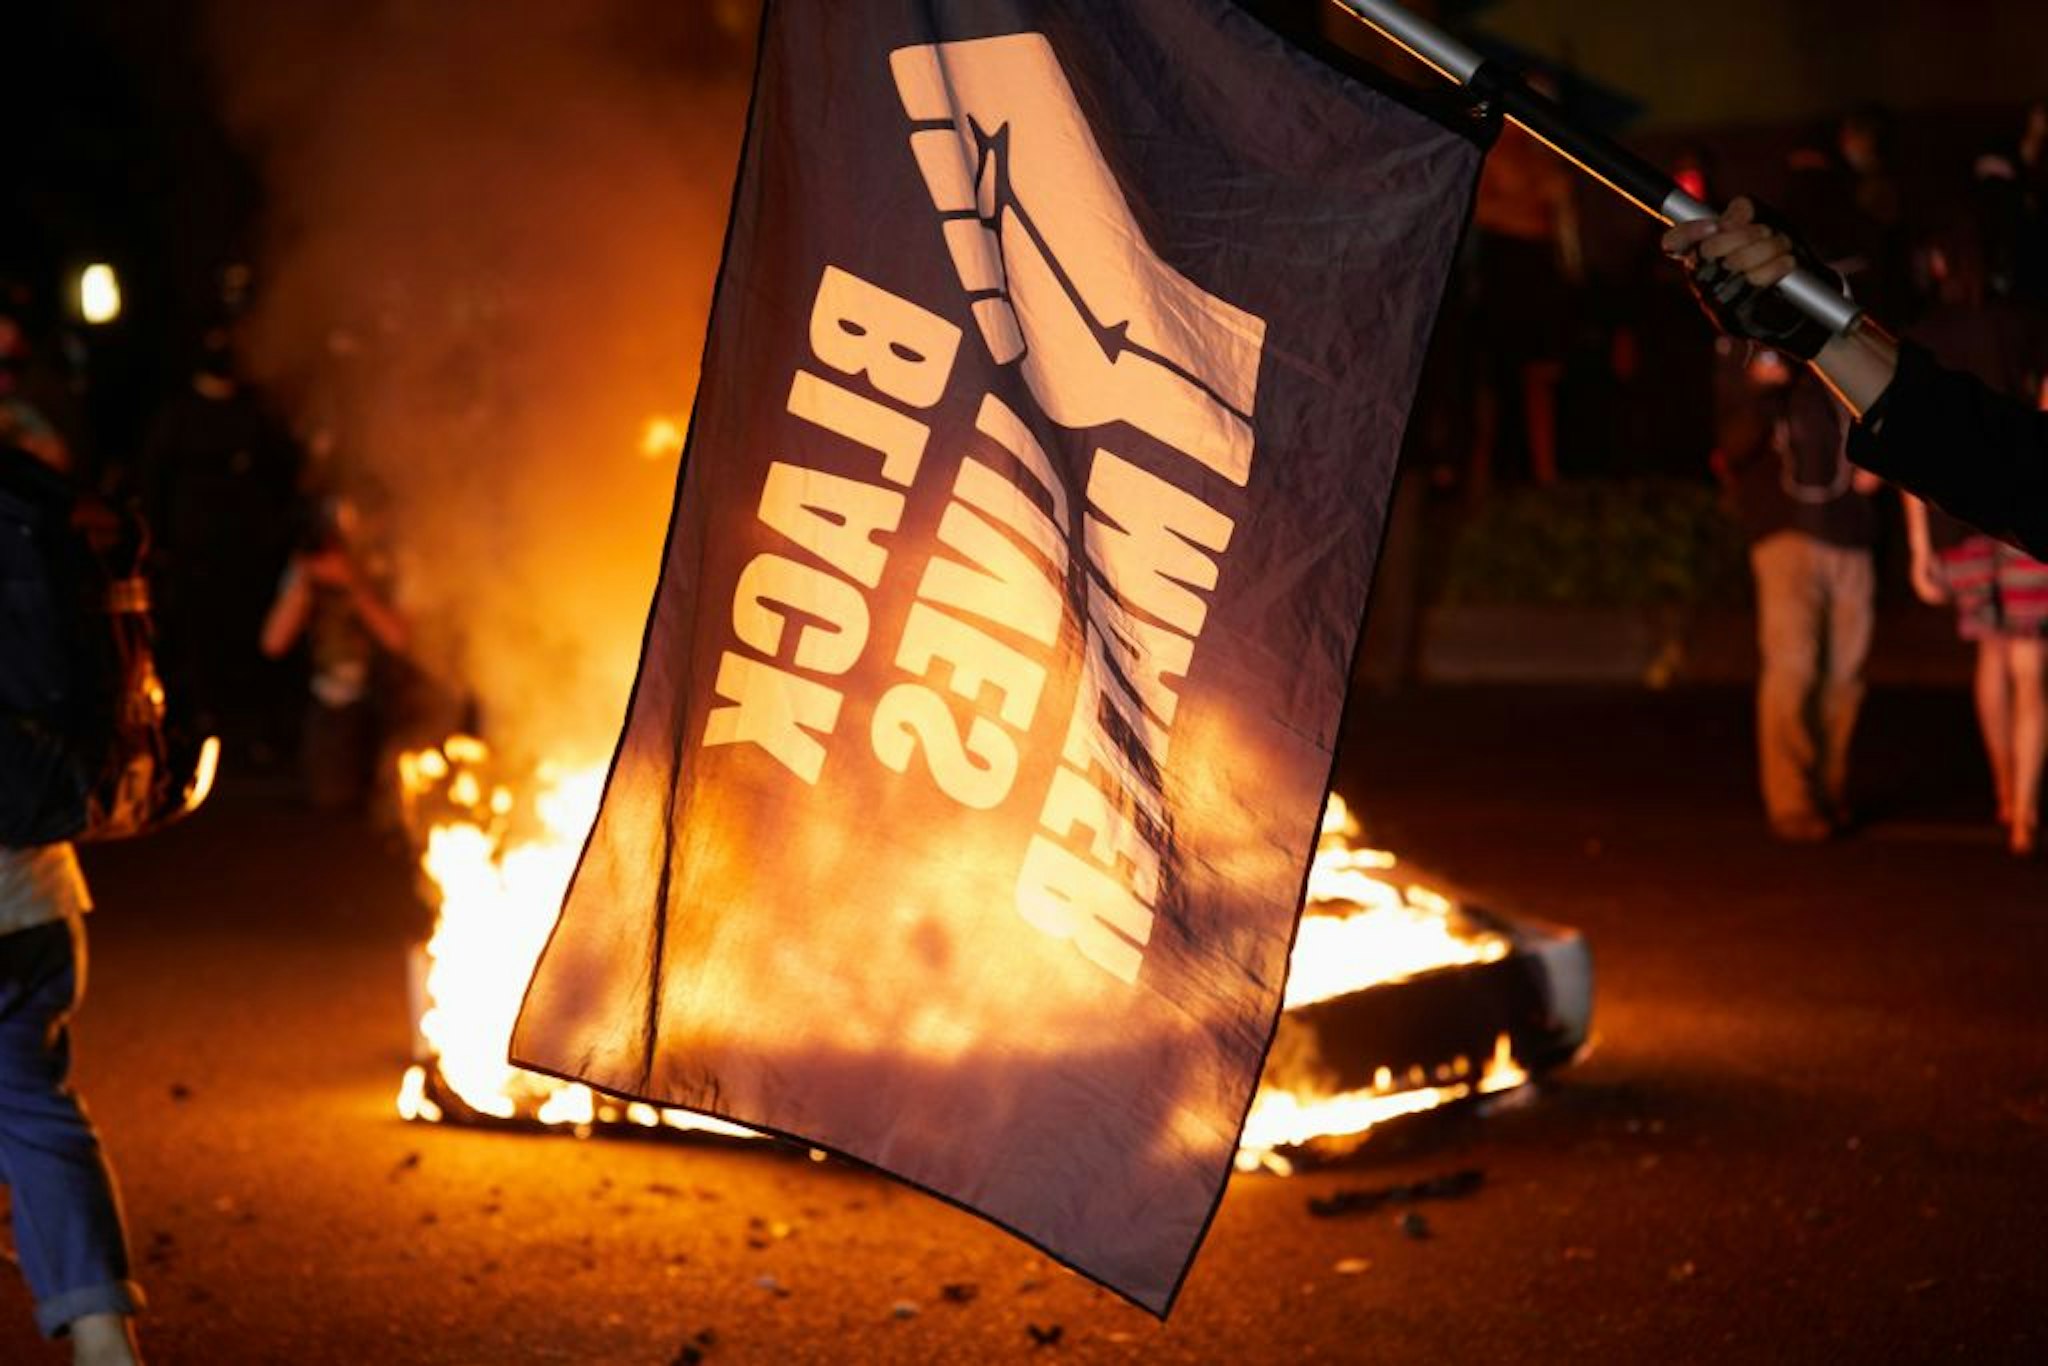 A Black Lives Matter flag waves in front of a fire at the North Precinct Police building in Portland, Oregon on September 6, 2020. - Protestors are marching for an end to racial inequality and police violence. Aaron Danielson, 39, a supporter of a far-right group called Patriot Prayer, was fatally shot August 29, 2020, in Portland, Oregon after he joined pro-Trump supporters who descended on the western US city, sparking confrontations with Black Lives Matter counter-protesters.